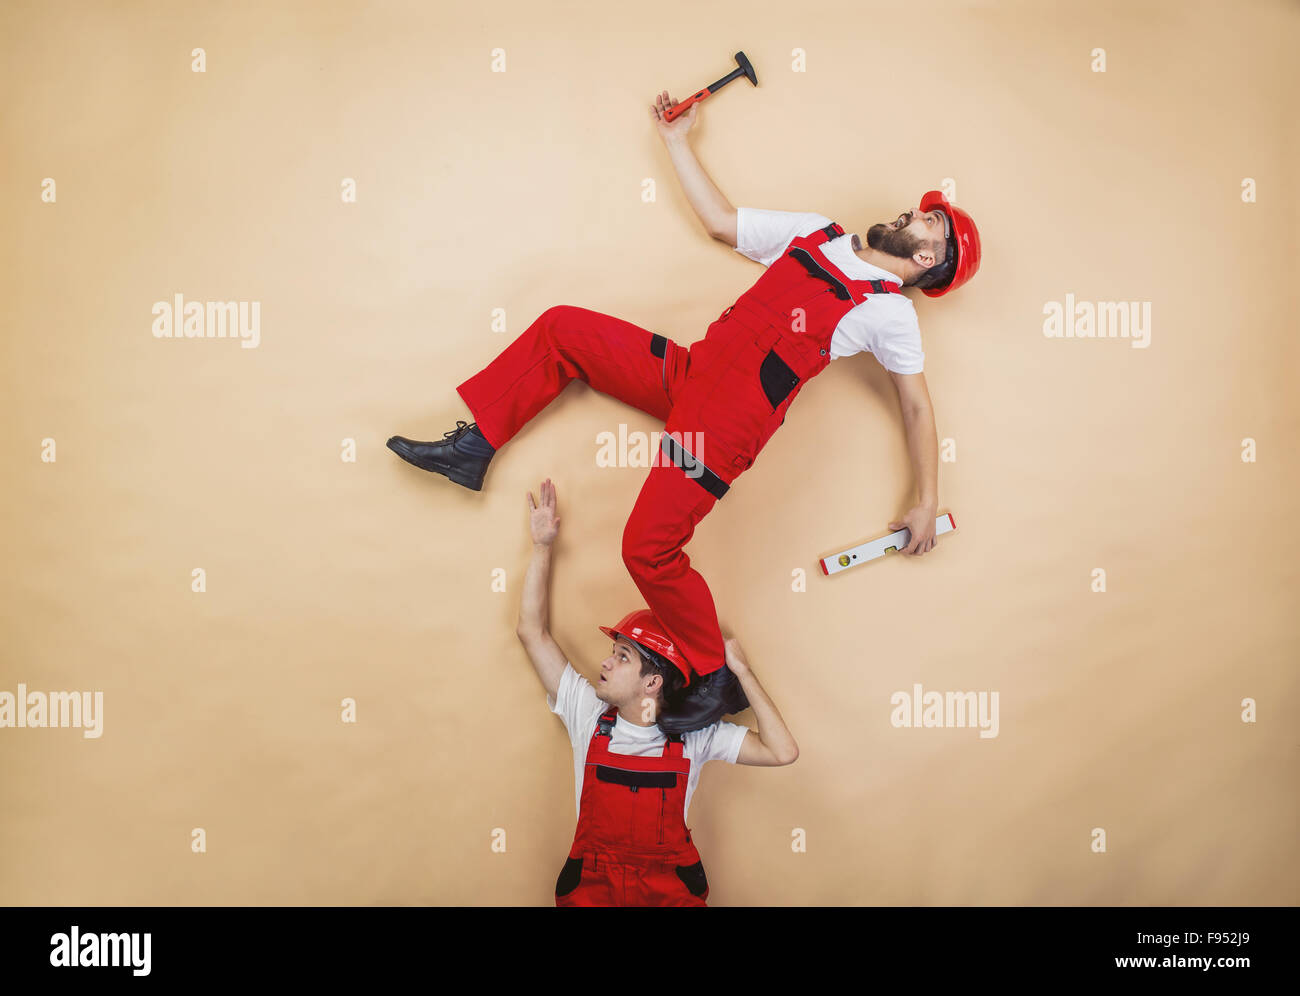 Construction workers have an accident. Funny studio poses. Stock Photo